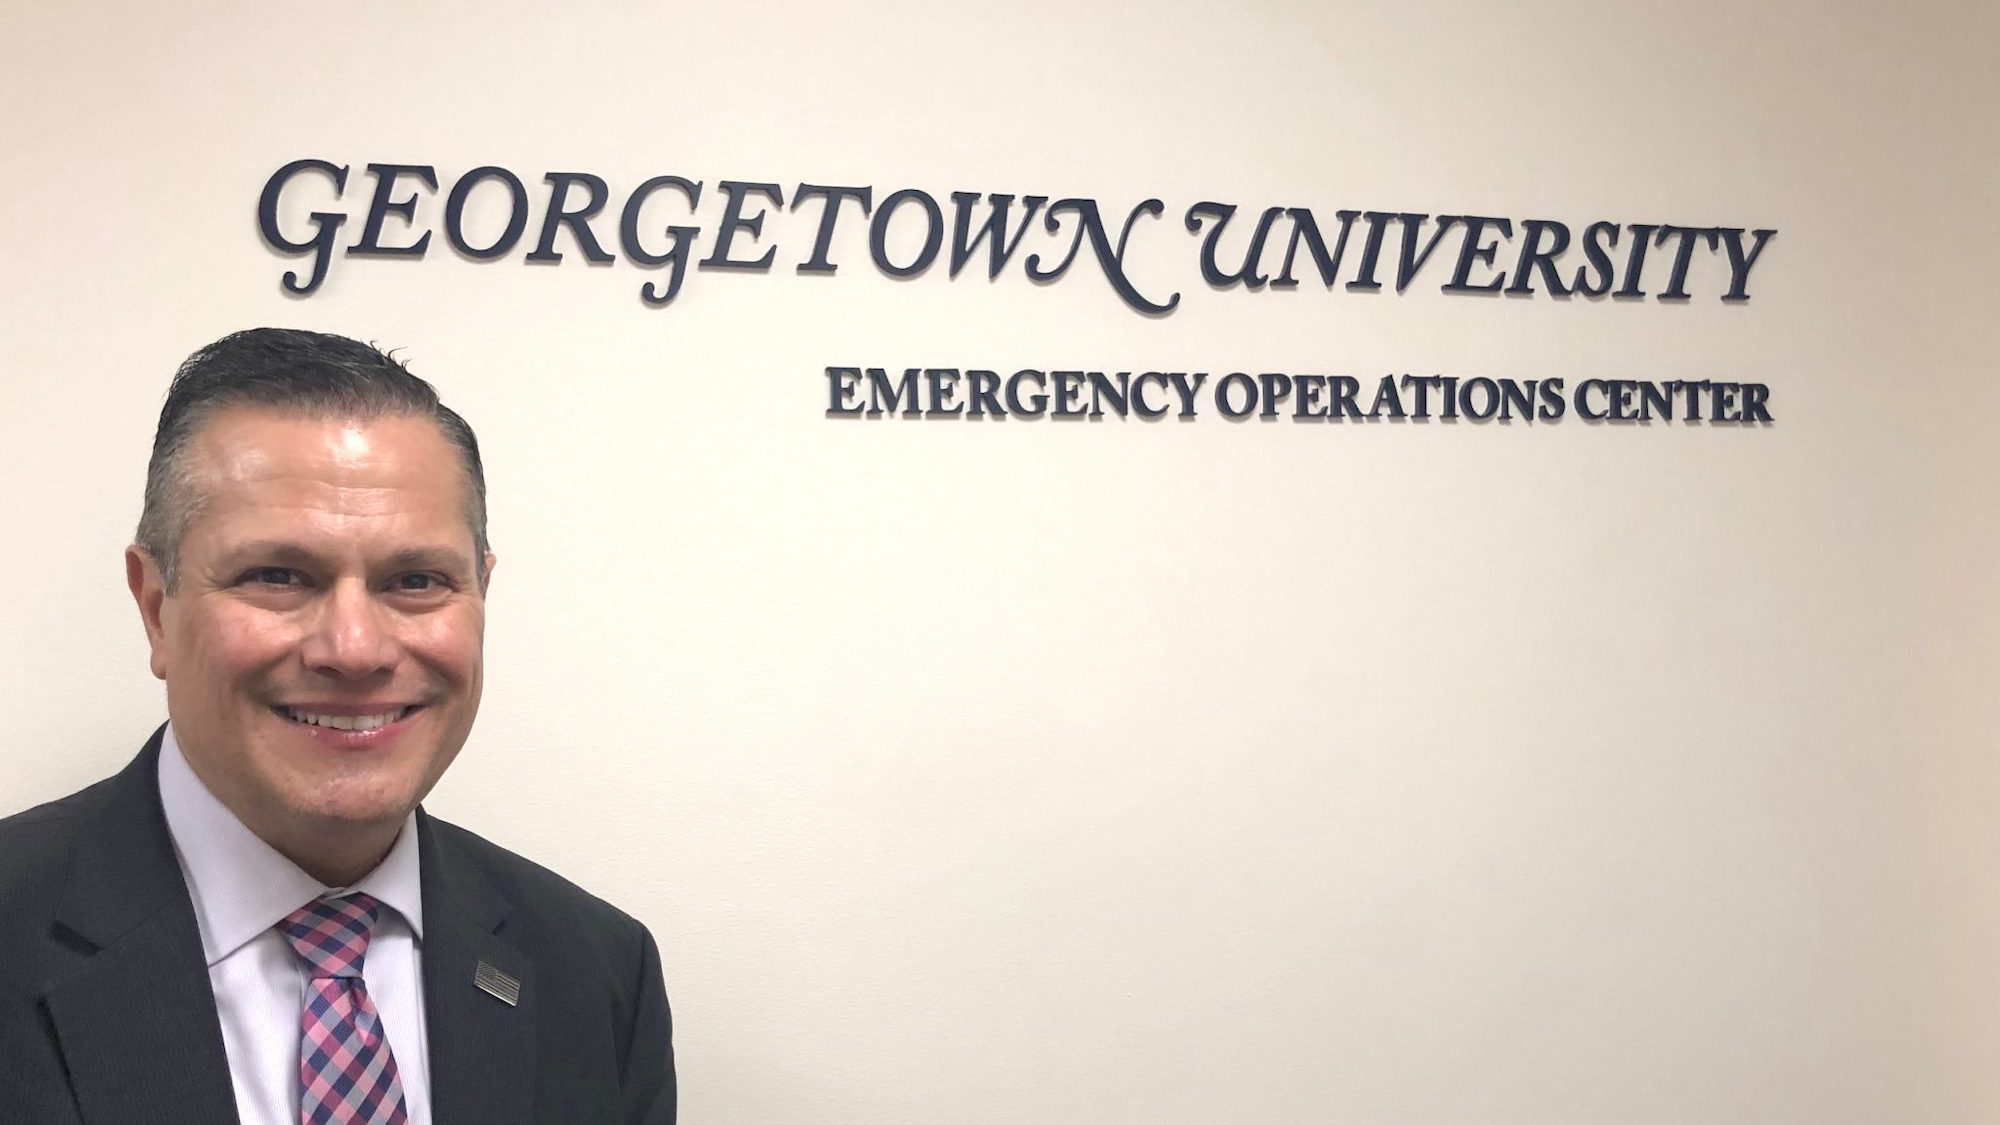 Marc Barbiere stands in front of Georgetown University Emergency Operations Center sign